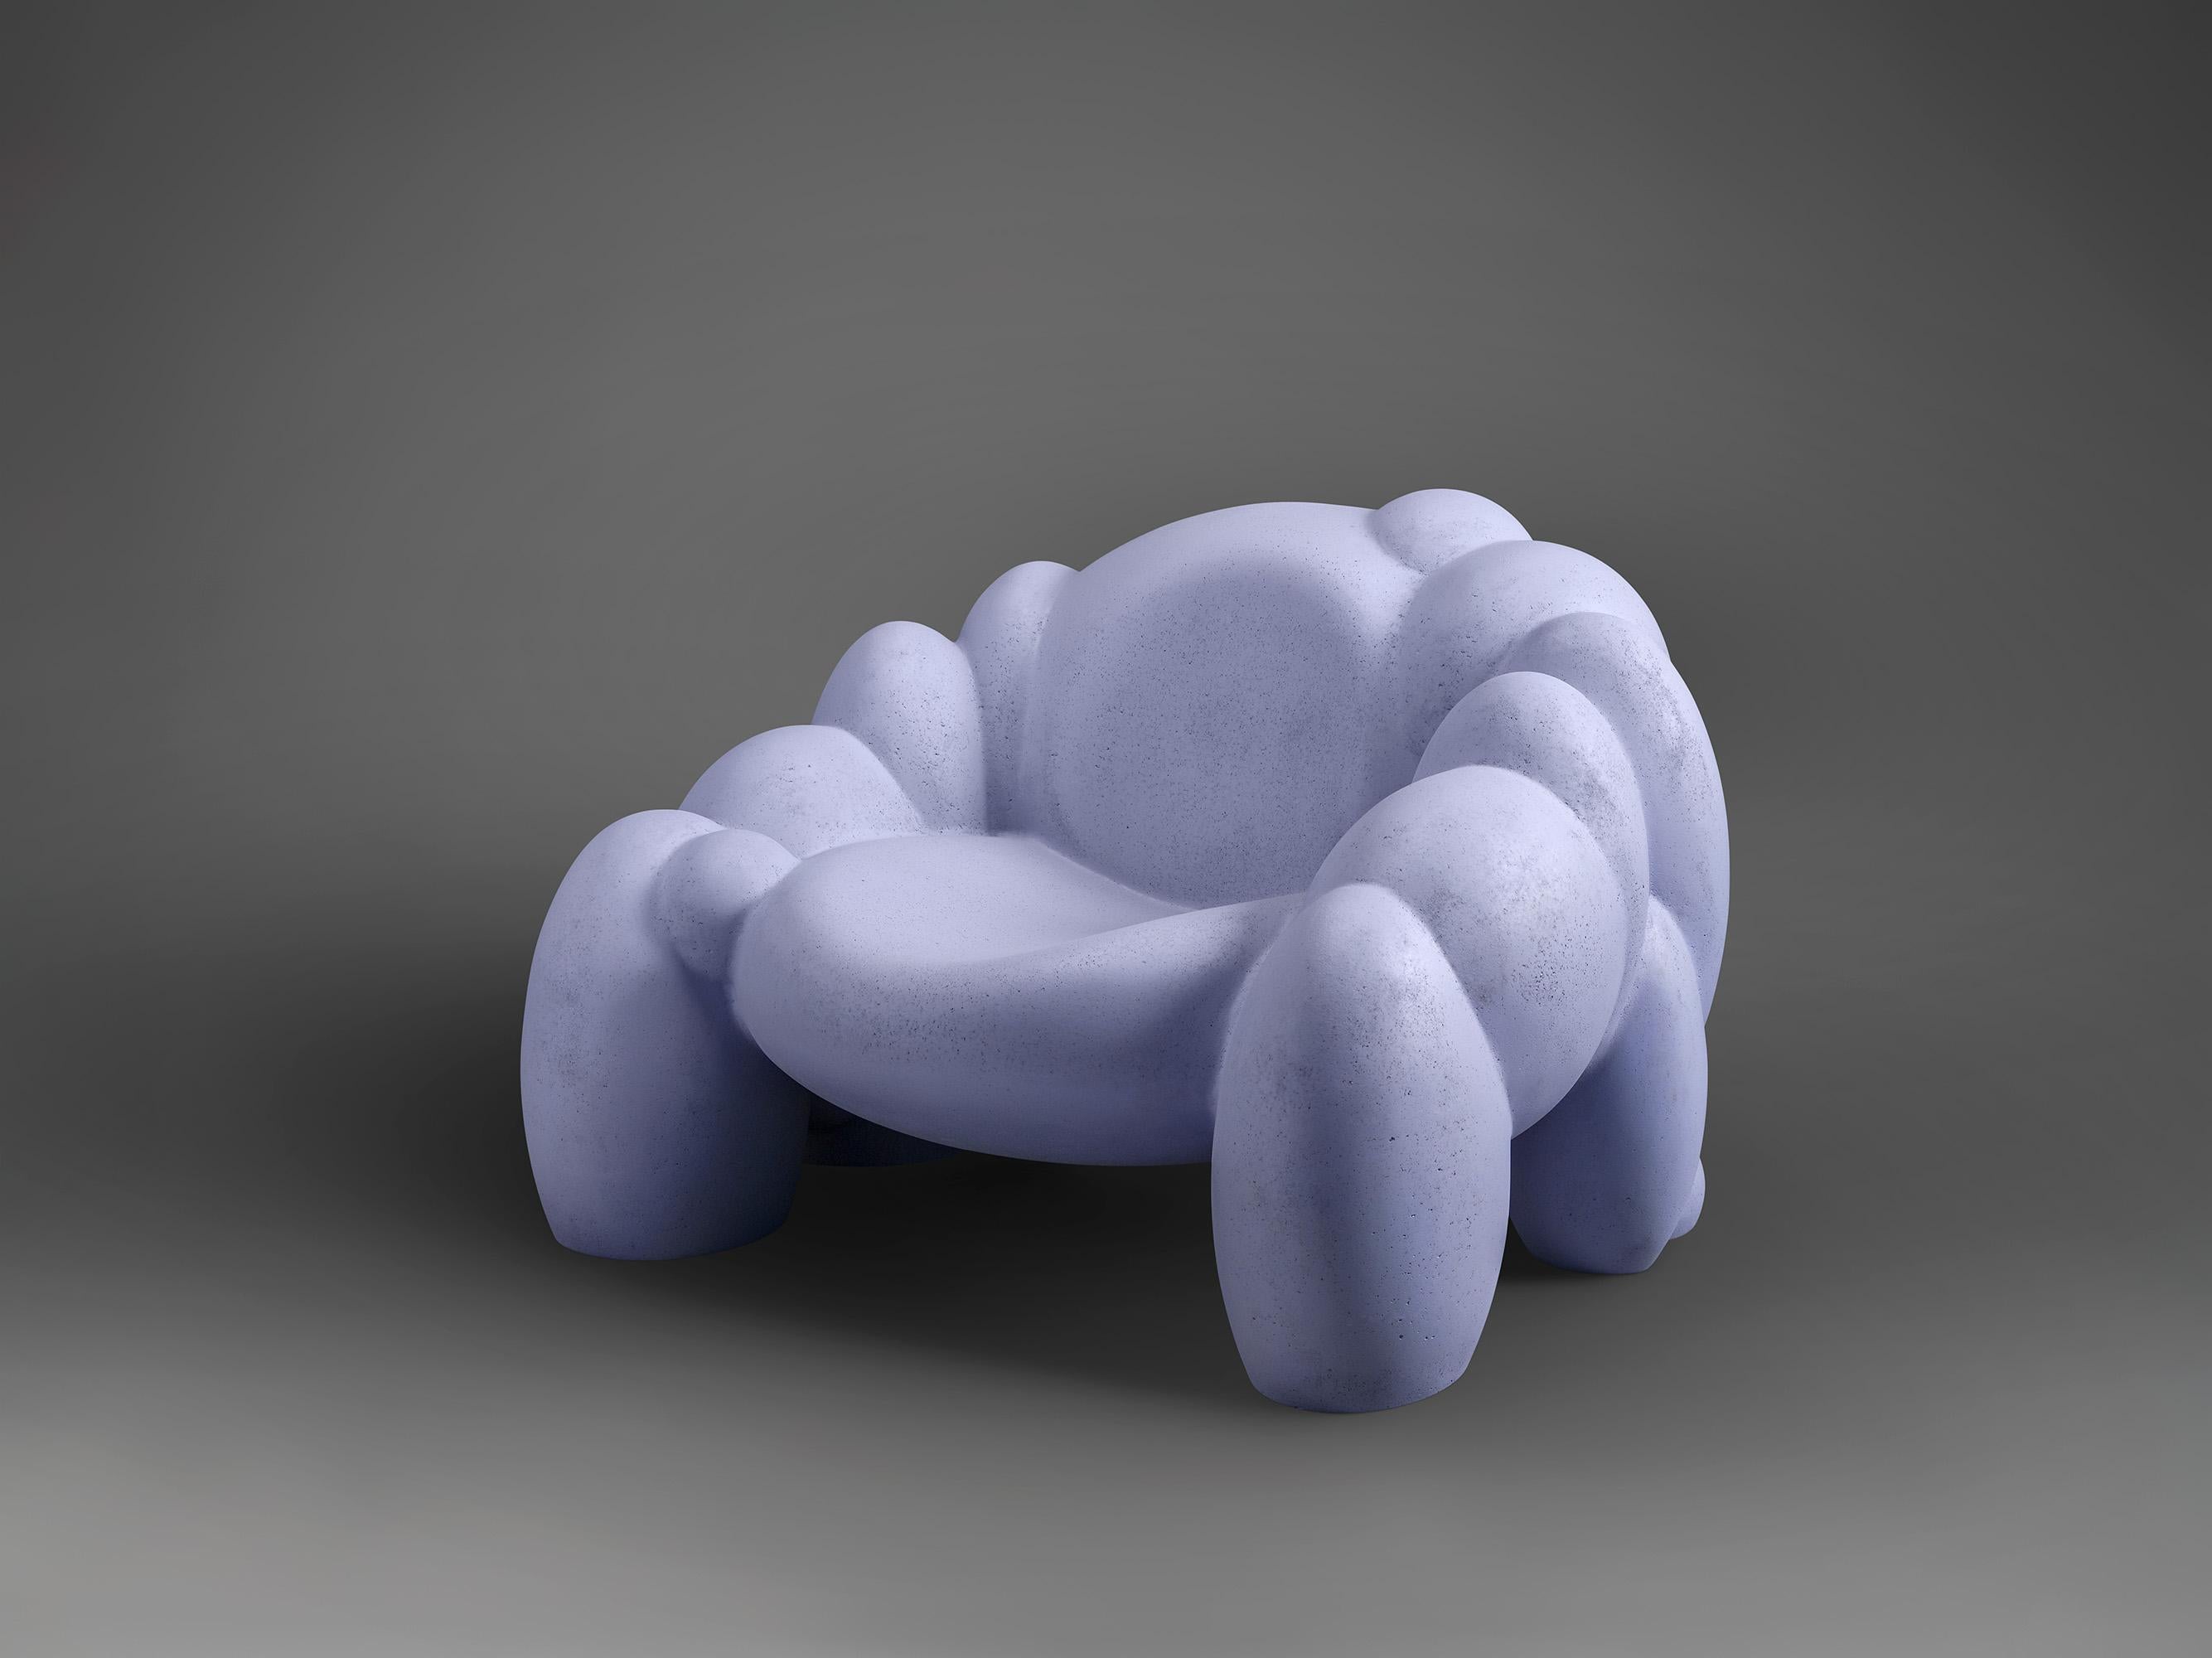 This armchair has a ballooning cellular form, as if constantly growing outwards, multiplying itself to overtake the surrounding space and embodies a Utopian dream of abundant, ever growing nature. There are four lilac armchairs all positioned around